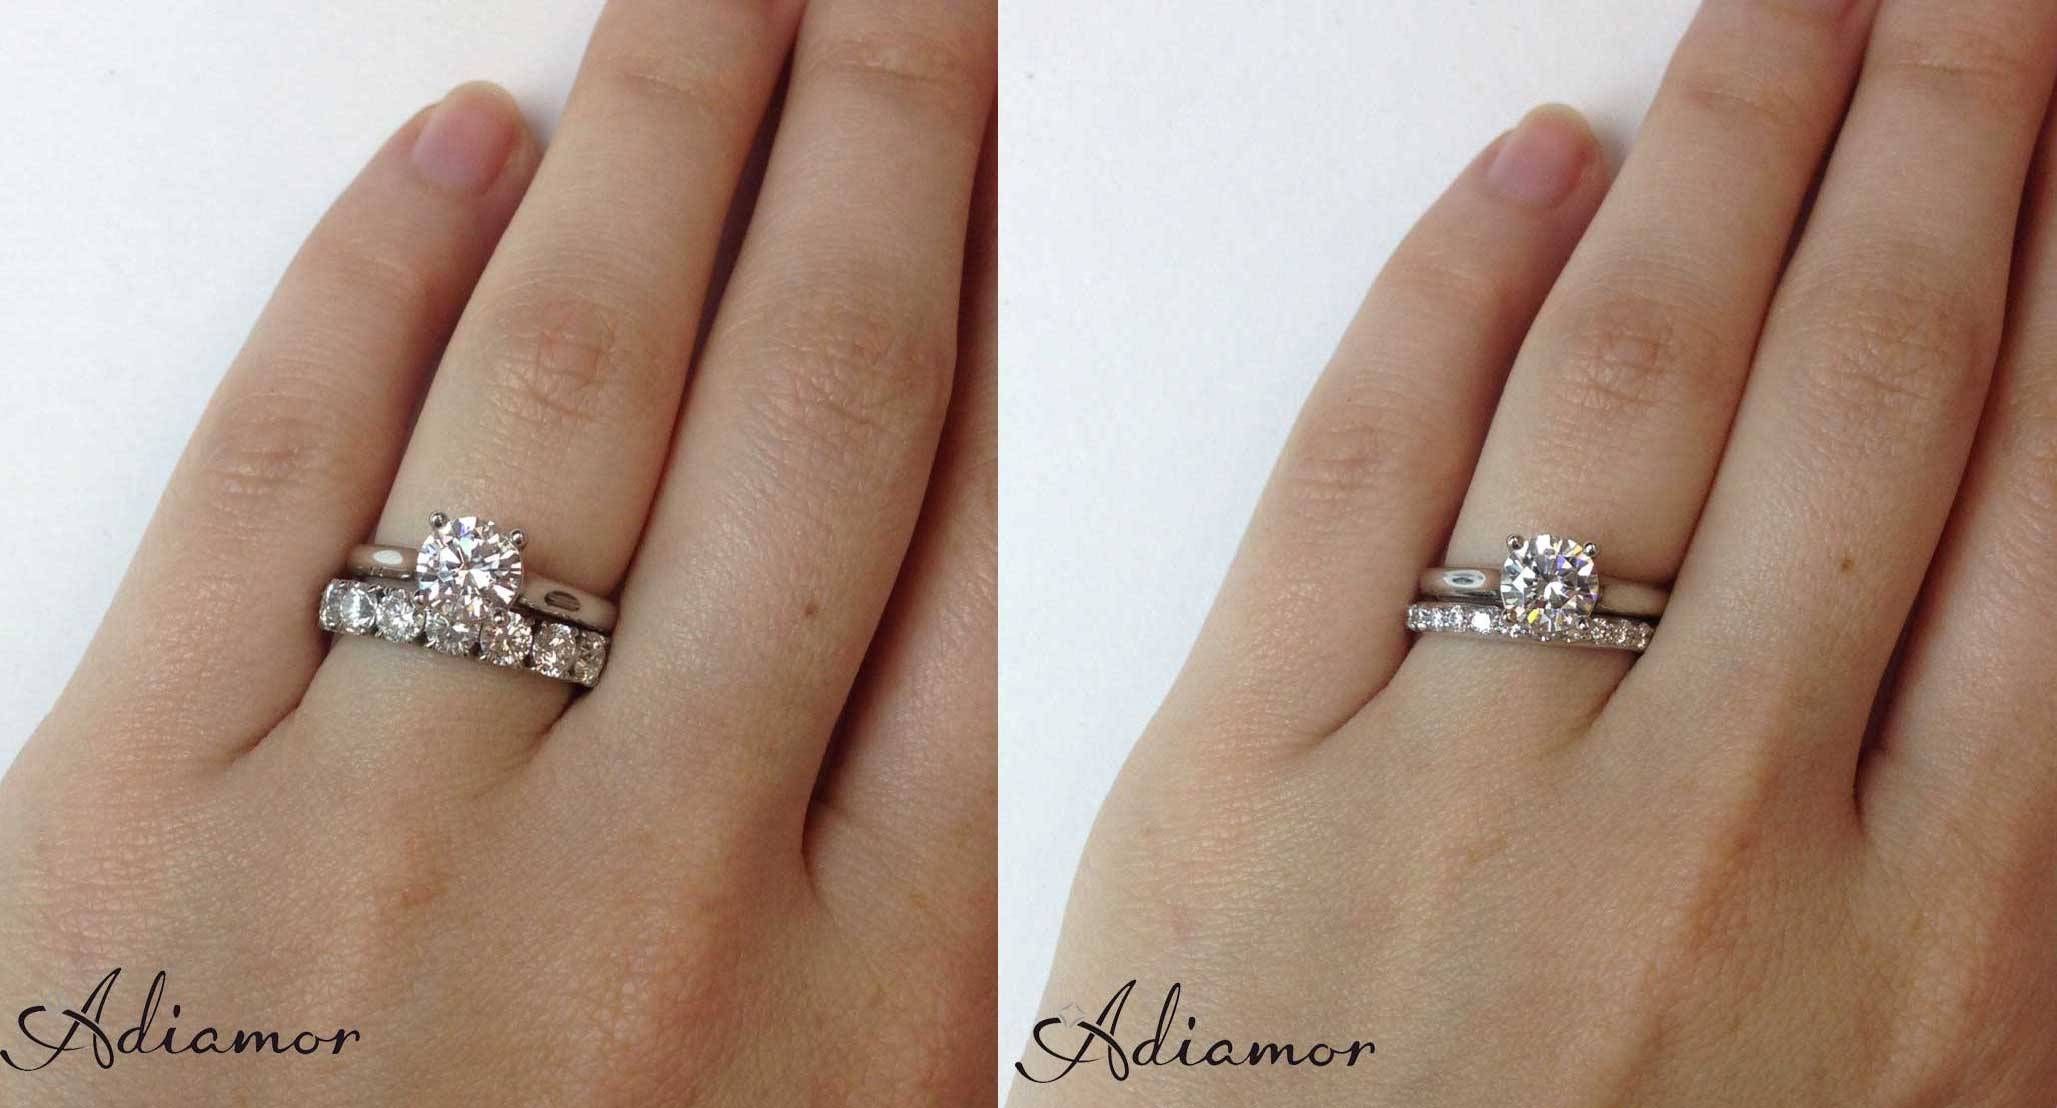 Eternity Bands Archives – Adiamor Blog With Regard To Eternity Band Wedding Rings (View 1 of 15)